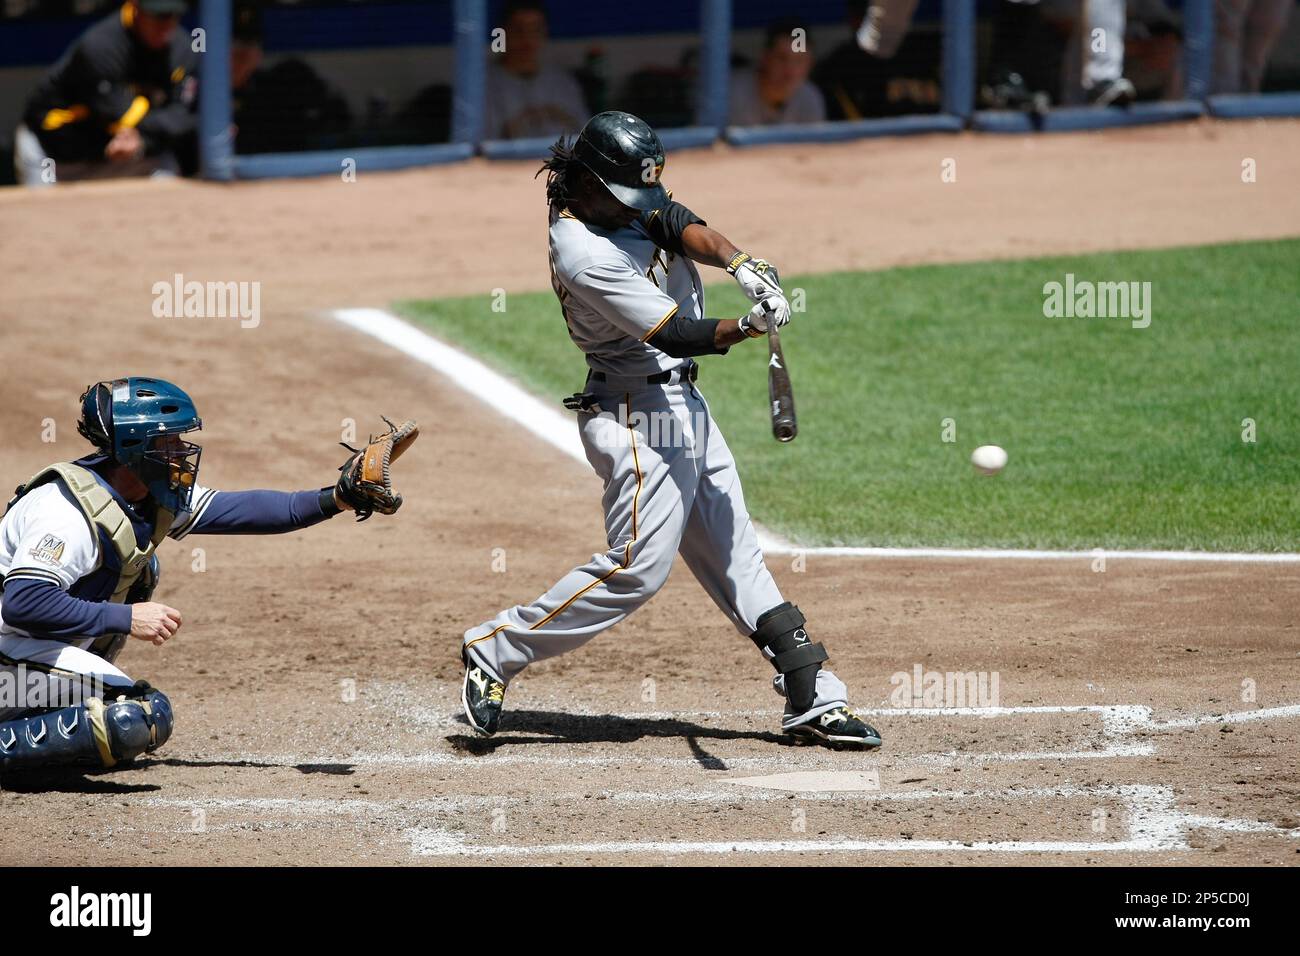 Milwaukee Brewers center fielder Carlos Gomez (27) during the game between  the Milwaukee Brewers and Chicago Cubs at Miller Park in Milwaukee,  Wisconsin. The Cubs defeated the Brewers 8-1. (Credit Image: ©